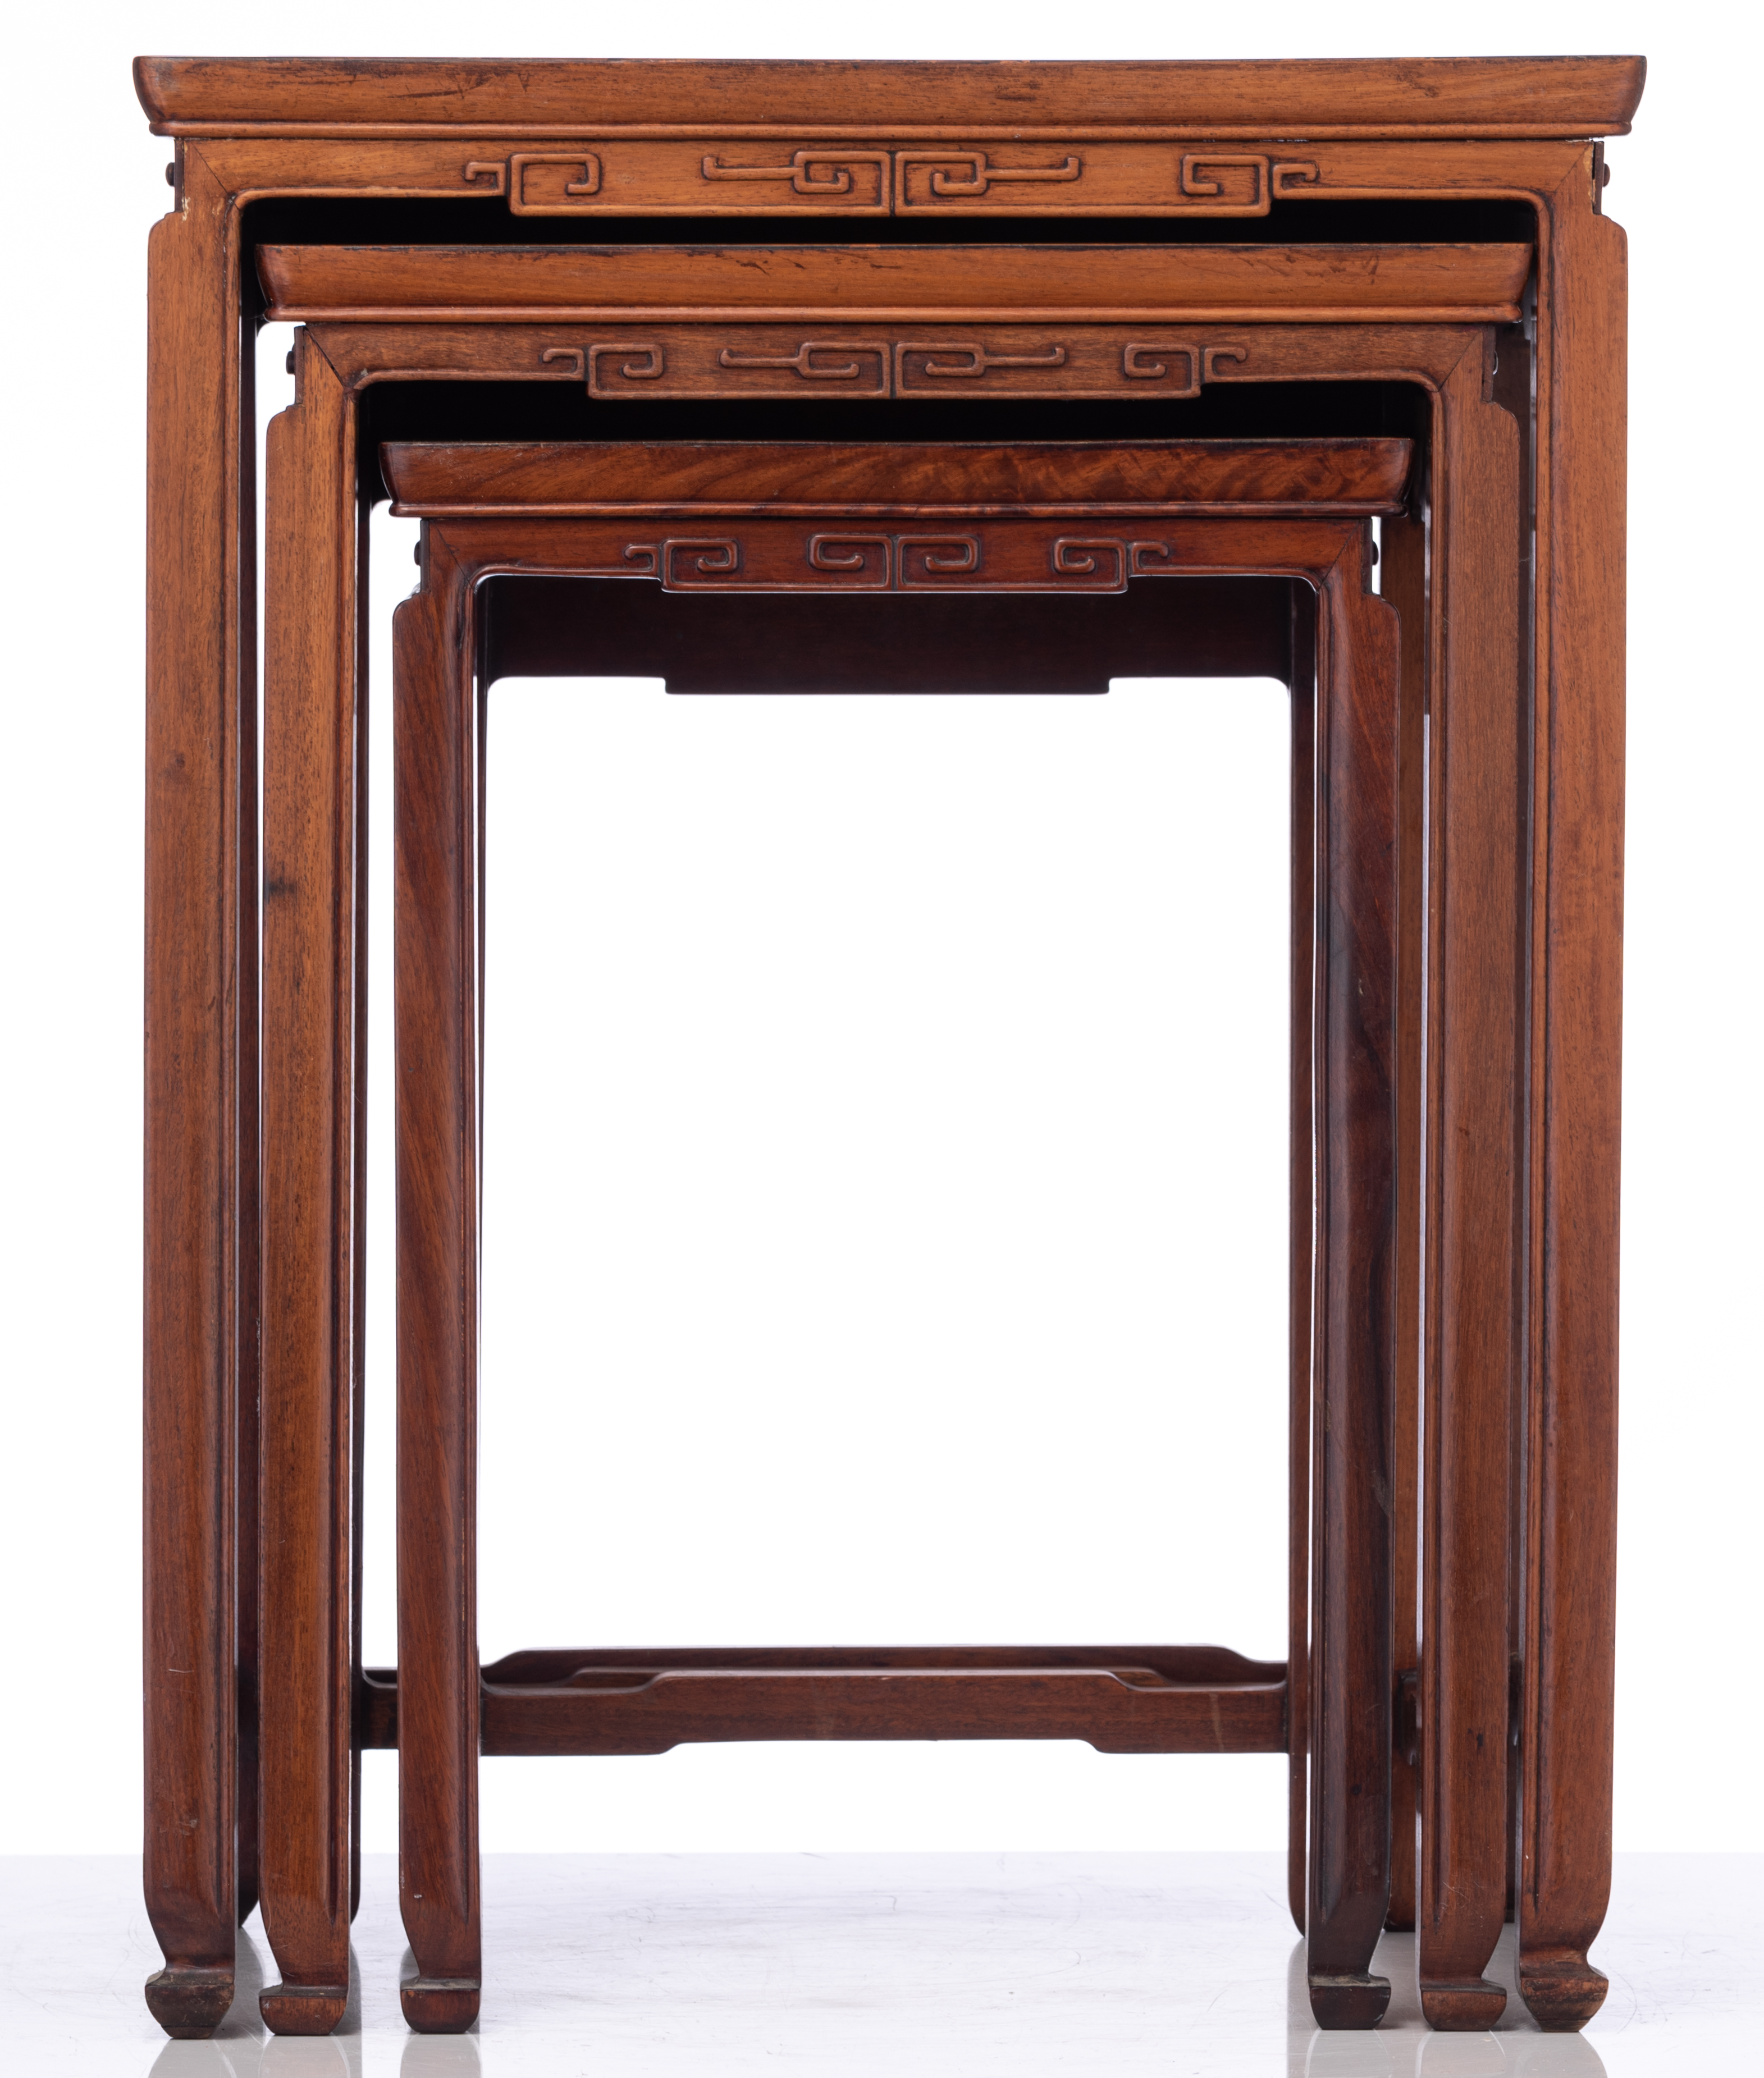 A set of three Chinese nesting tables, H 53,5 - 66,5 cm - Image 2 of 7